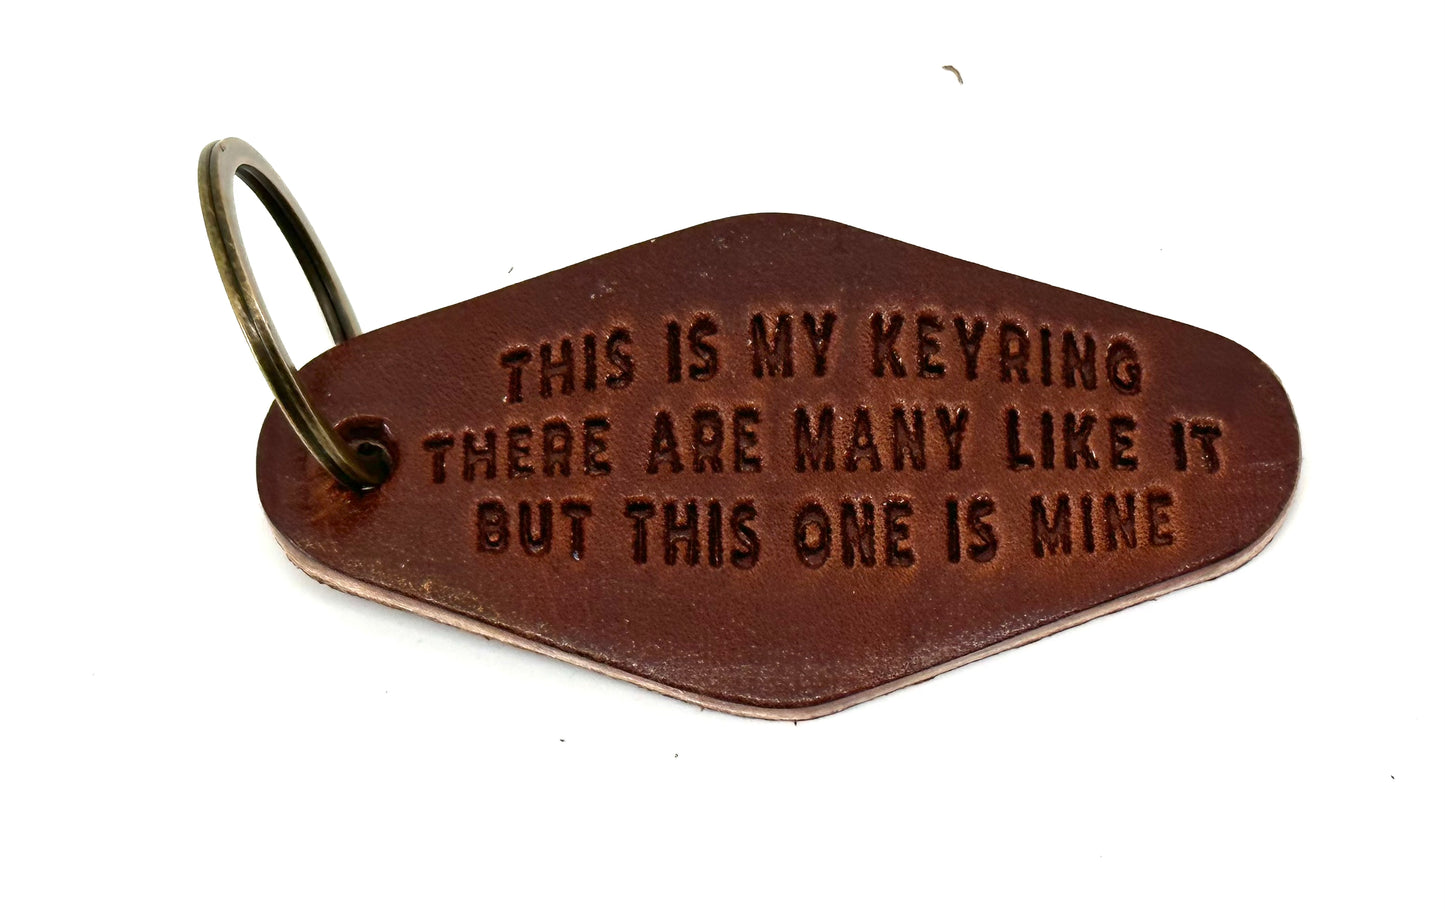 Our Motel Keychain - Get Lost